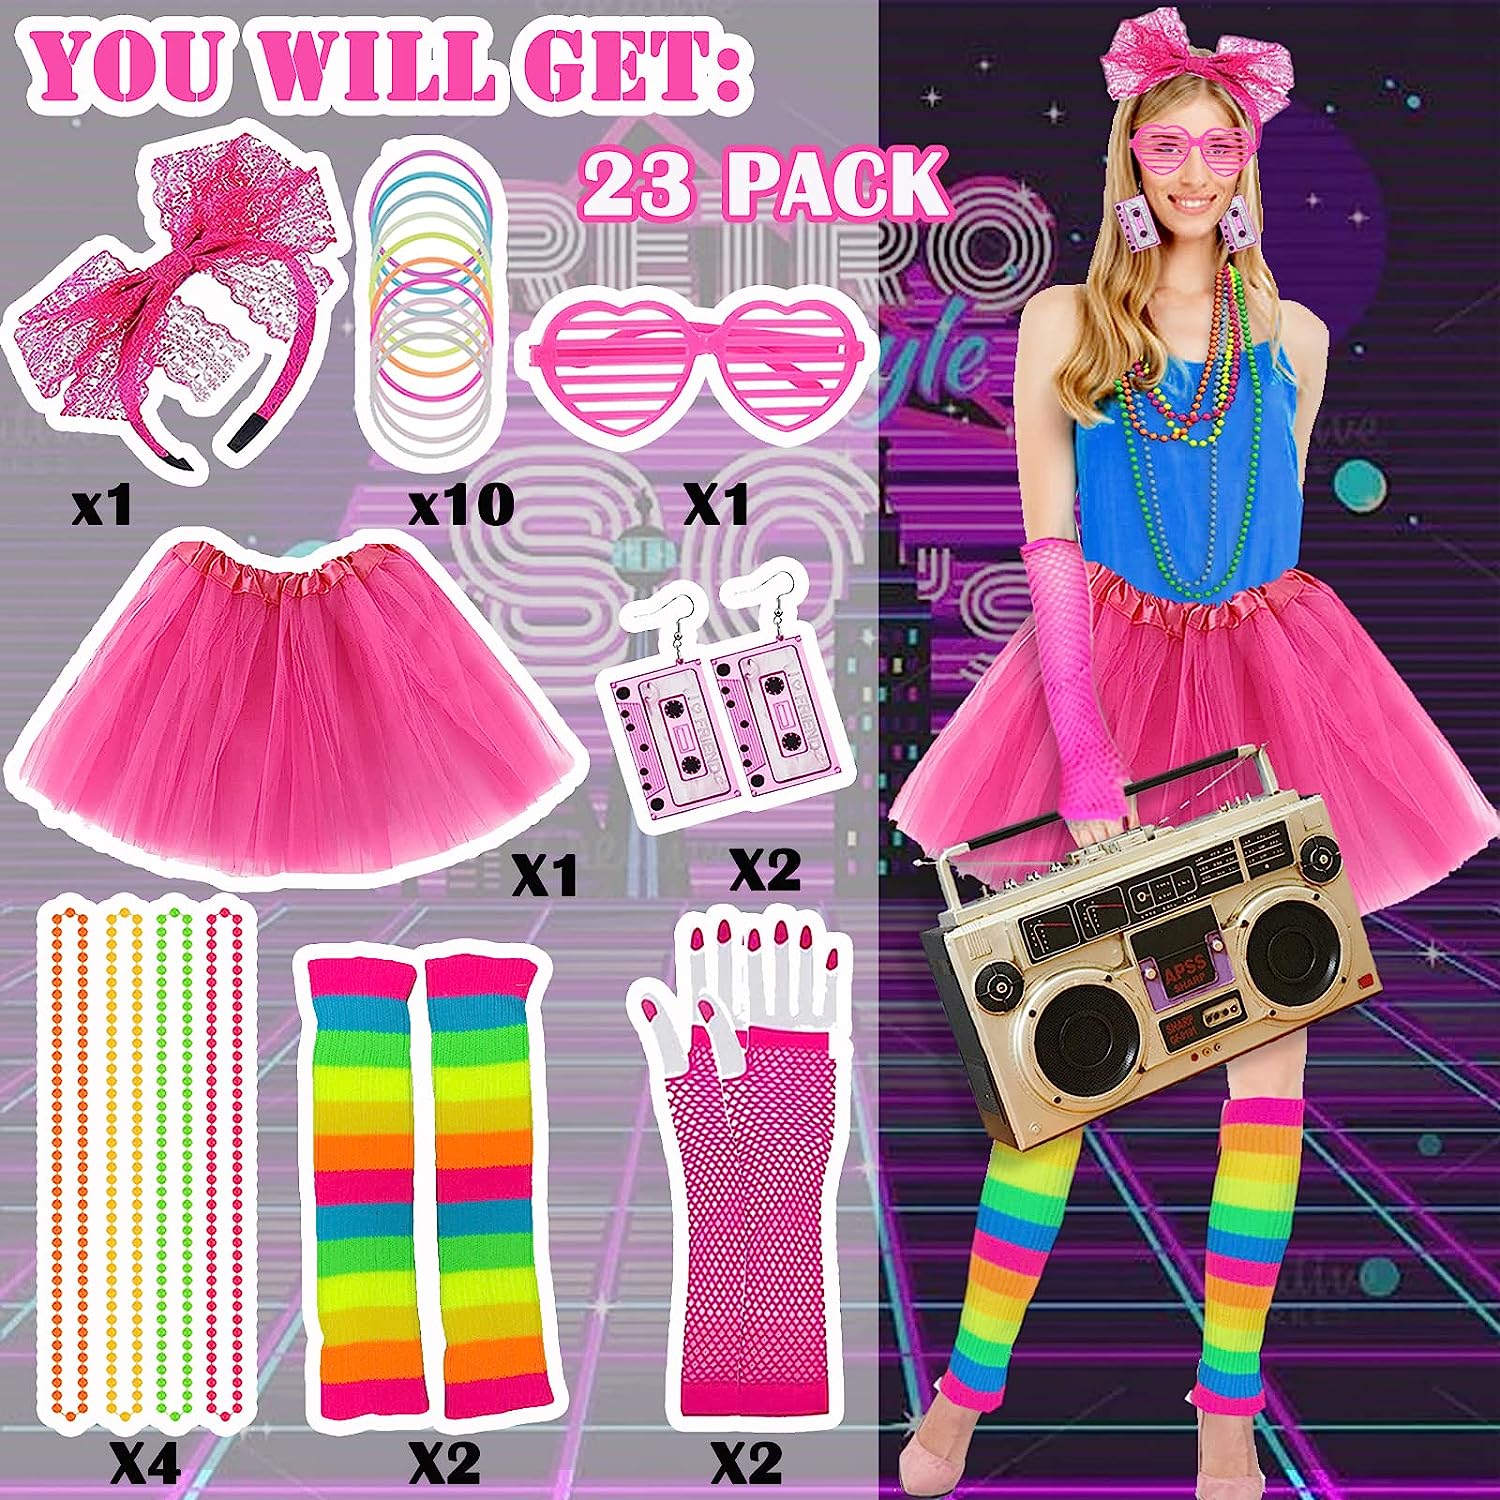 Costumes Cosplay 80s Fancy Dress Costume Accessories Set Lace